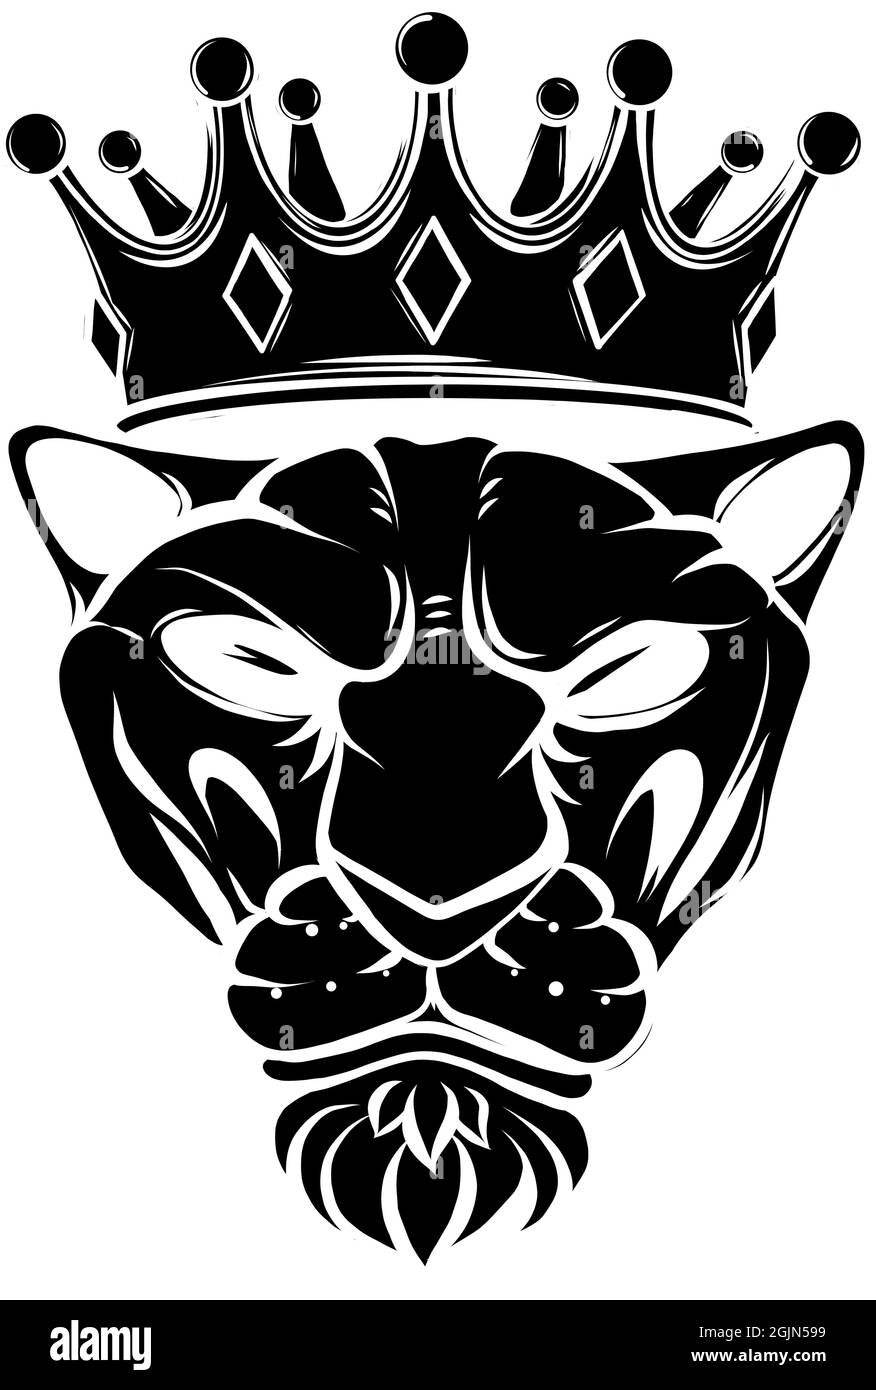 Tiger silhouette illustration with crown vector design Stock Vector